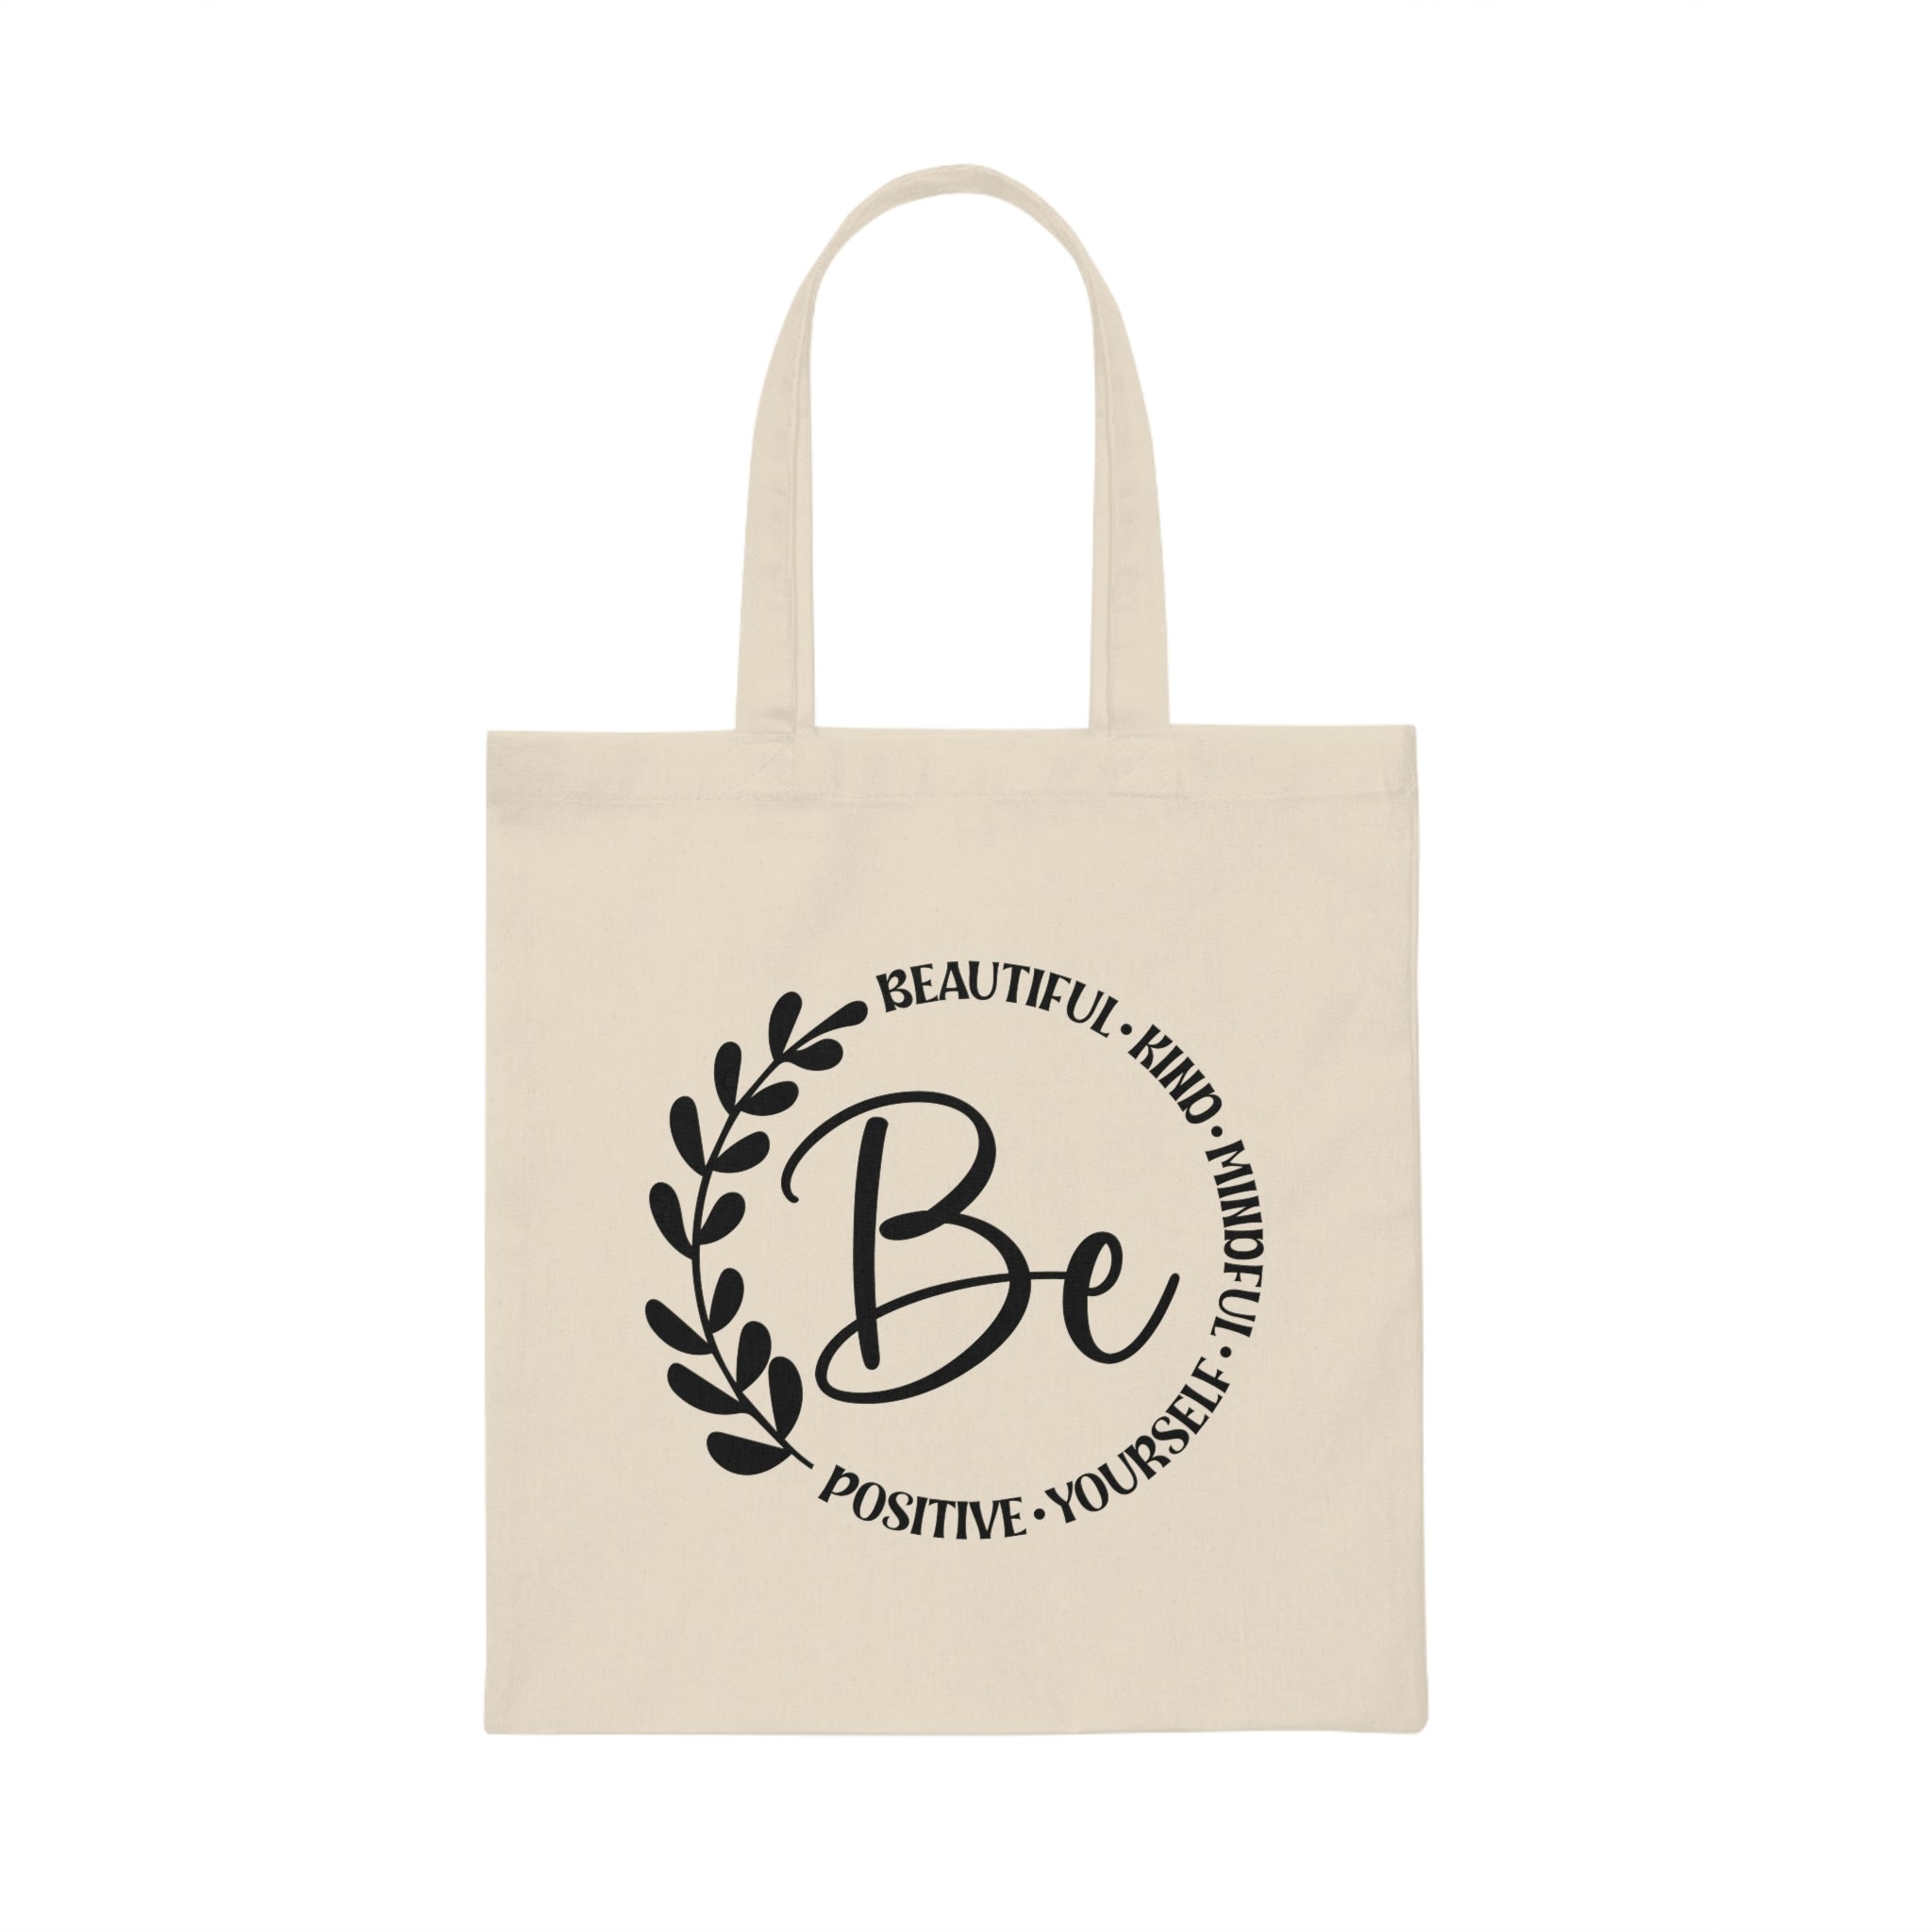 Our Tote Bags, Ourselves